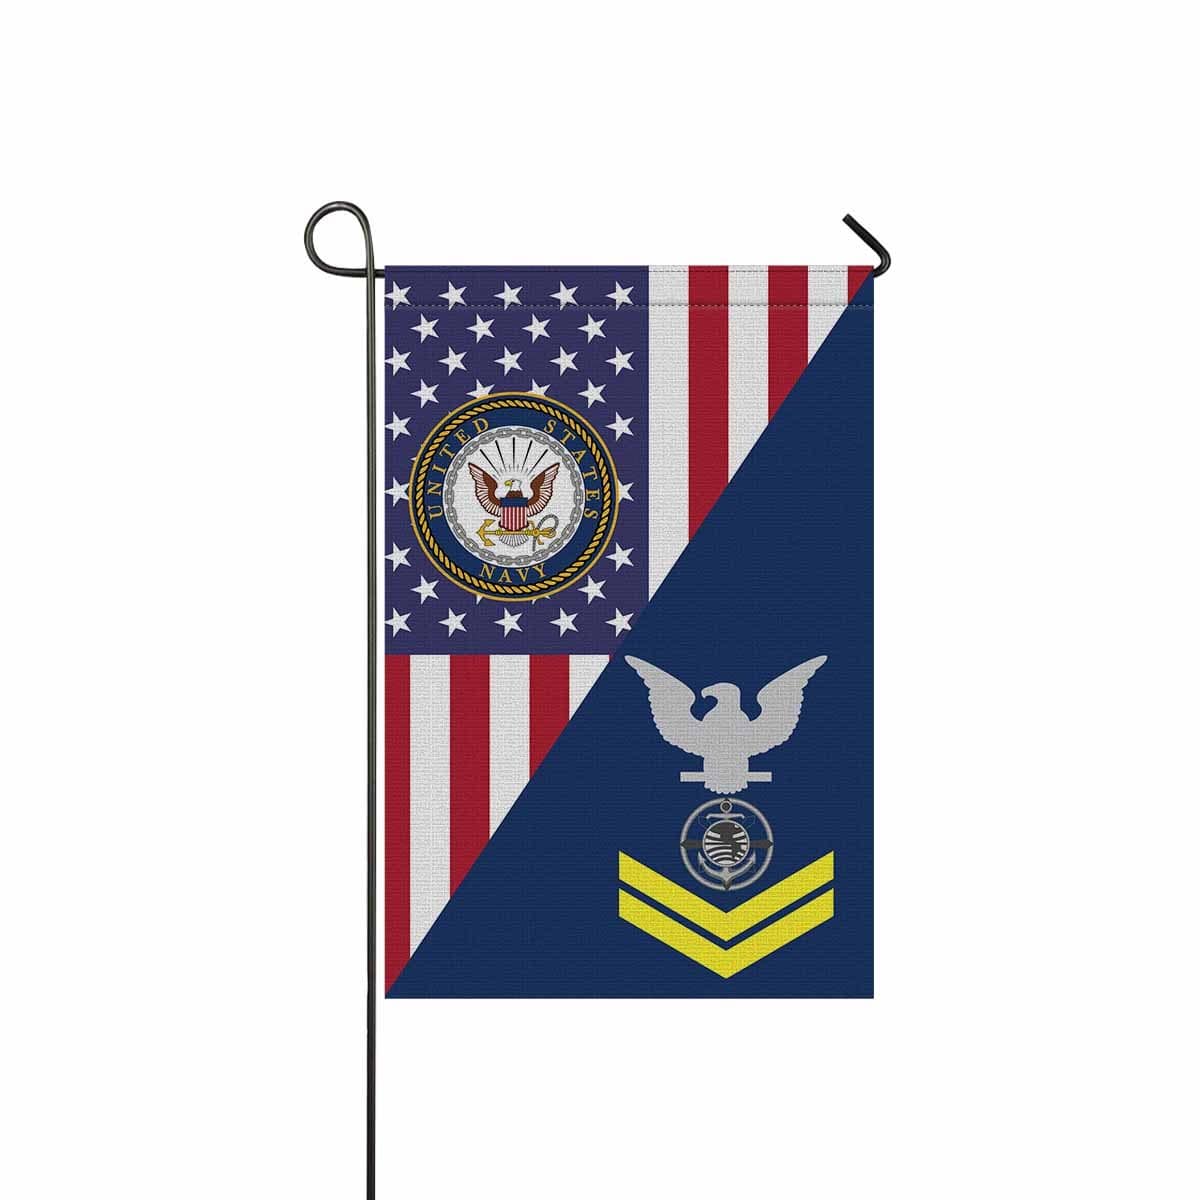 Navy Religious Program Specialist Navy RP E-5 Gold Stripe Garden Flag/Yard Flag 12 inches x 18 inches Twin-Side Printing-GDFlag-Navy-Rating-Veterans Nation